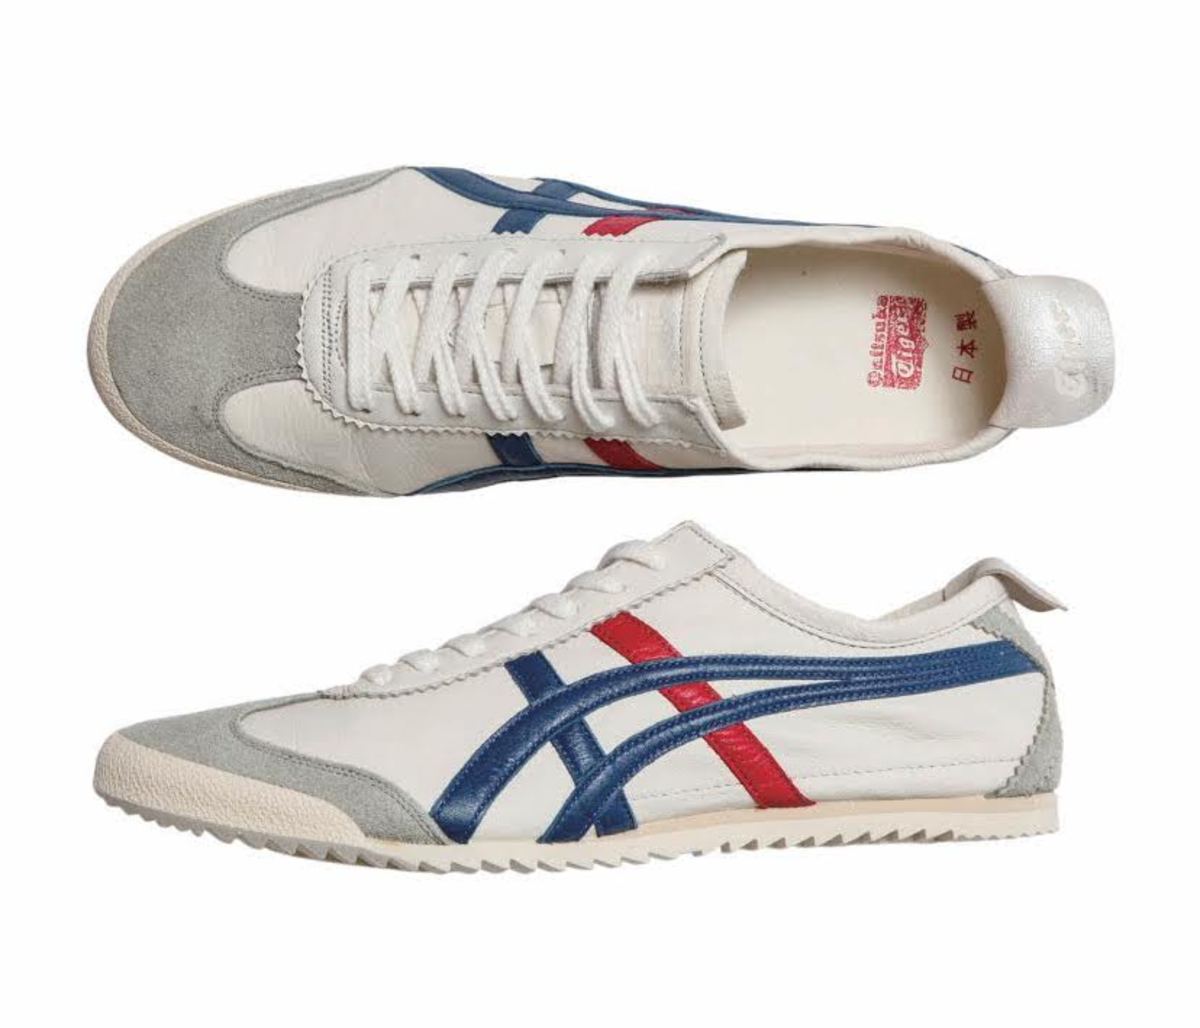 Onitsuka Tiger releases its Nippon Made 